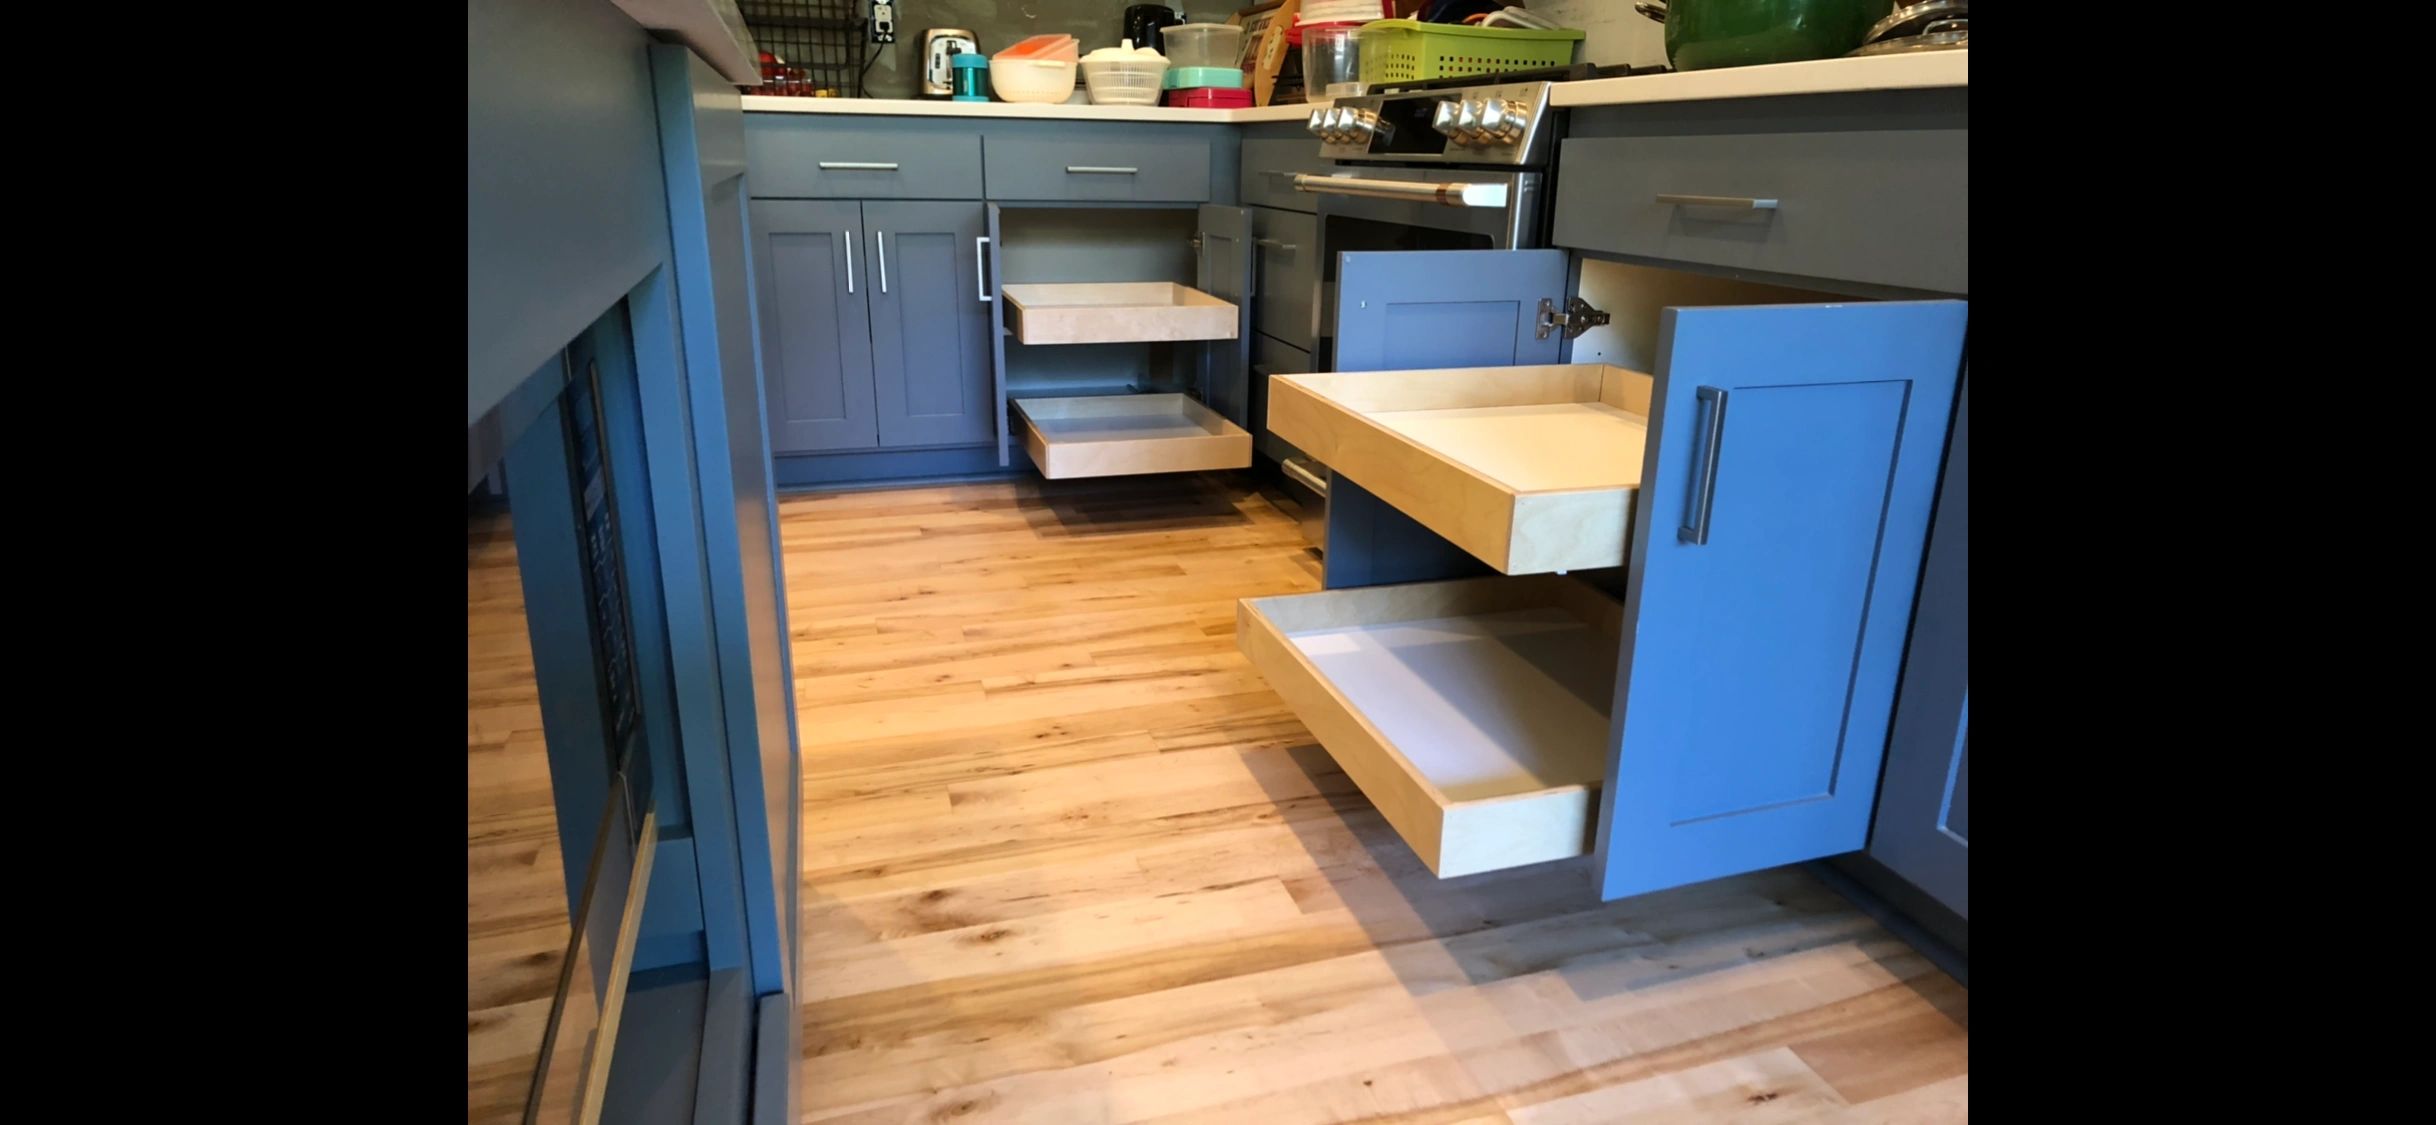 53 Cool Pull Out Kitchen Drawers And Shelves, Shelterness